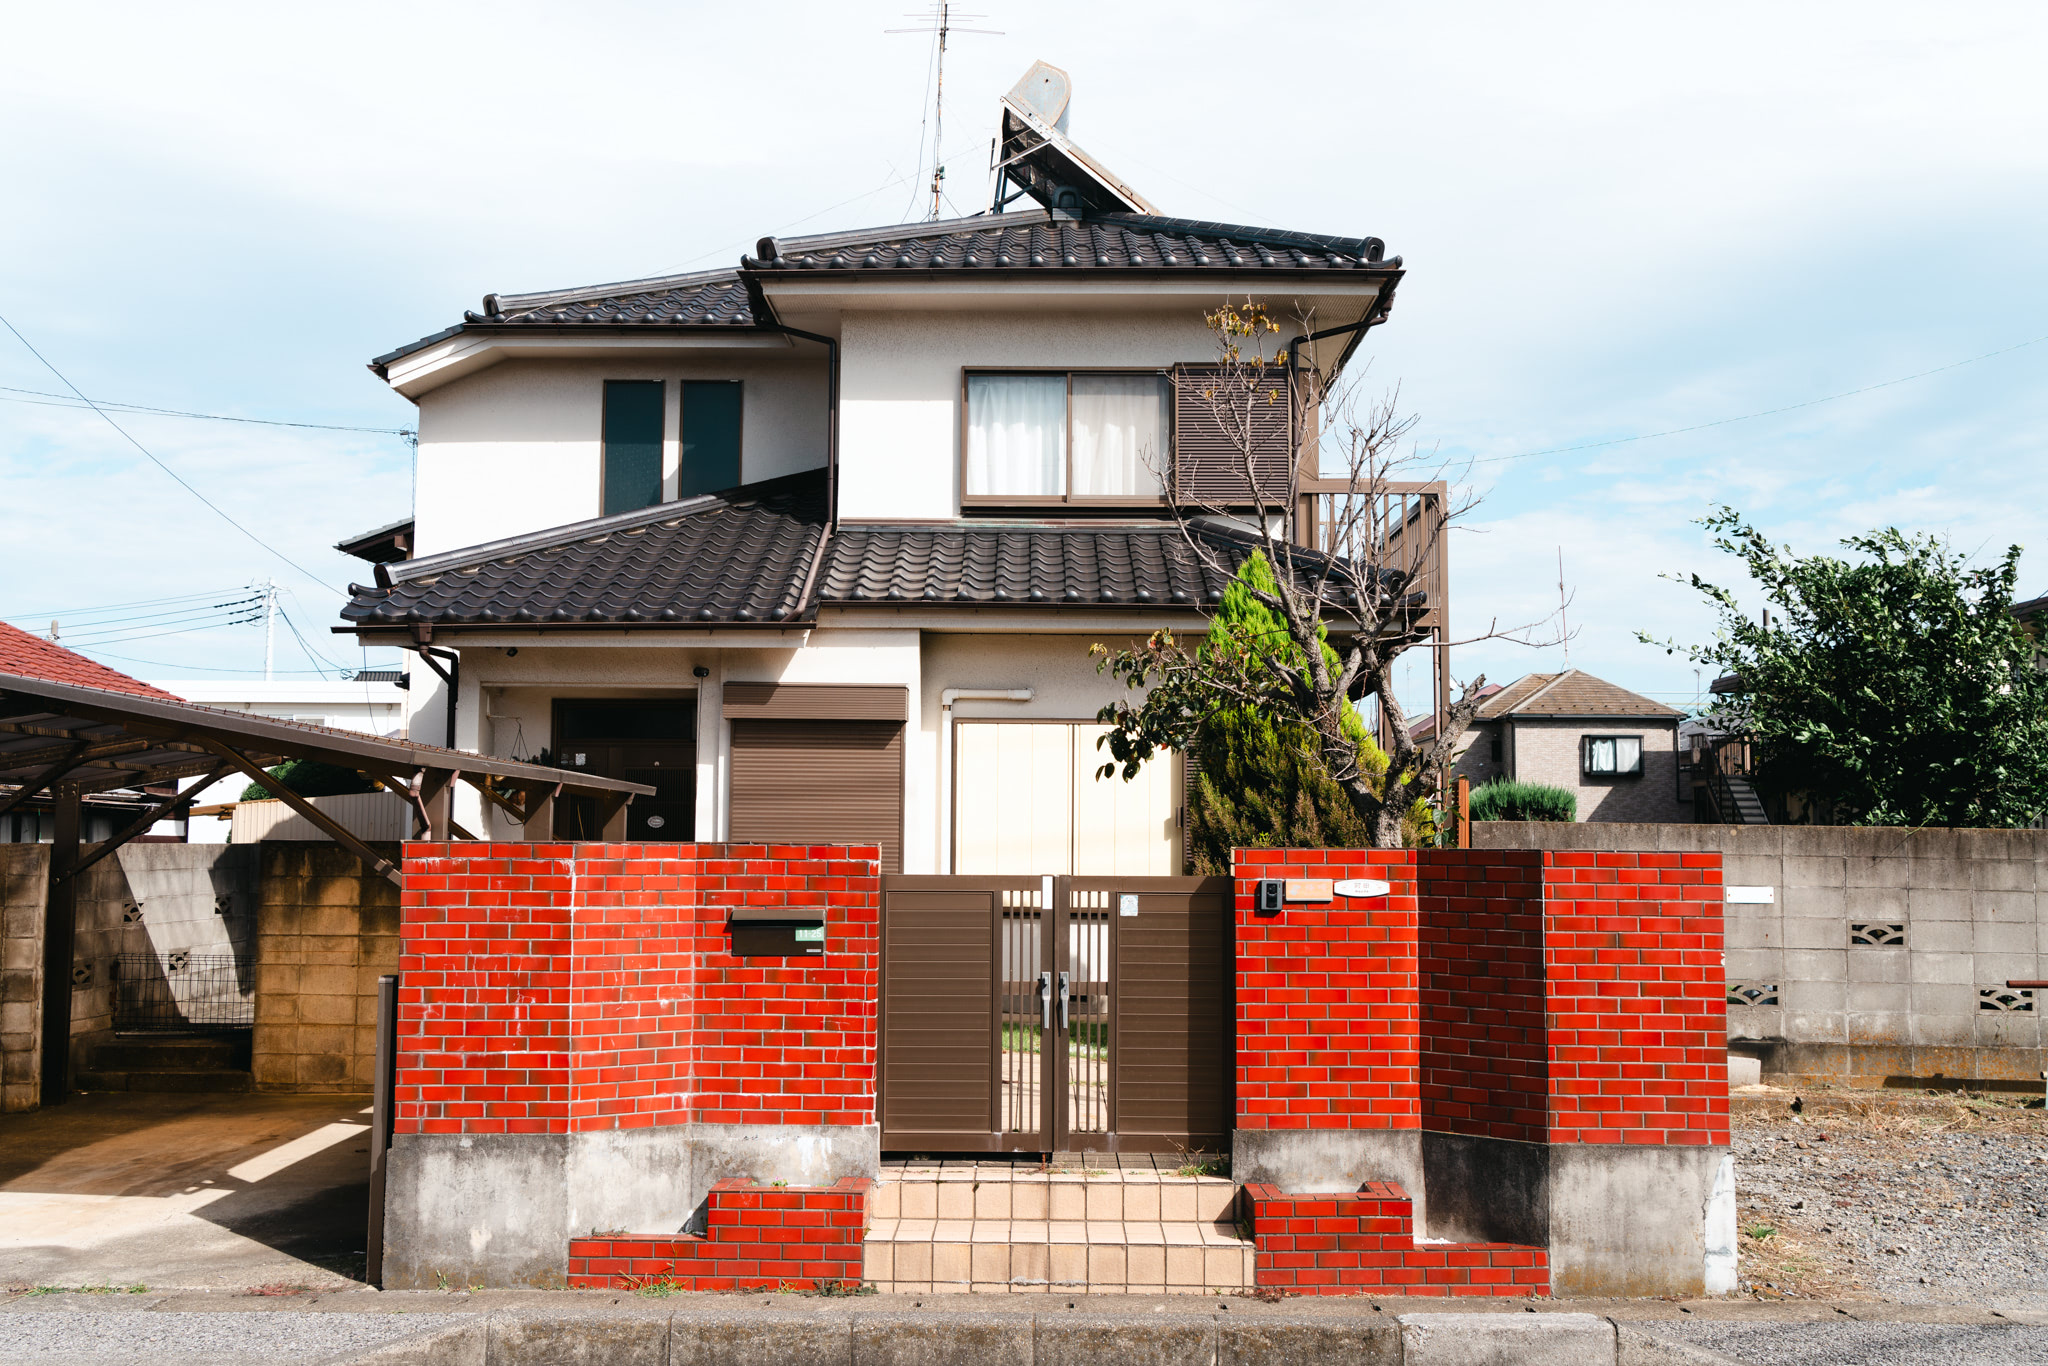 Traditional Japanese entrance gate with red accents